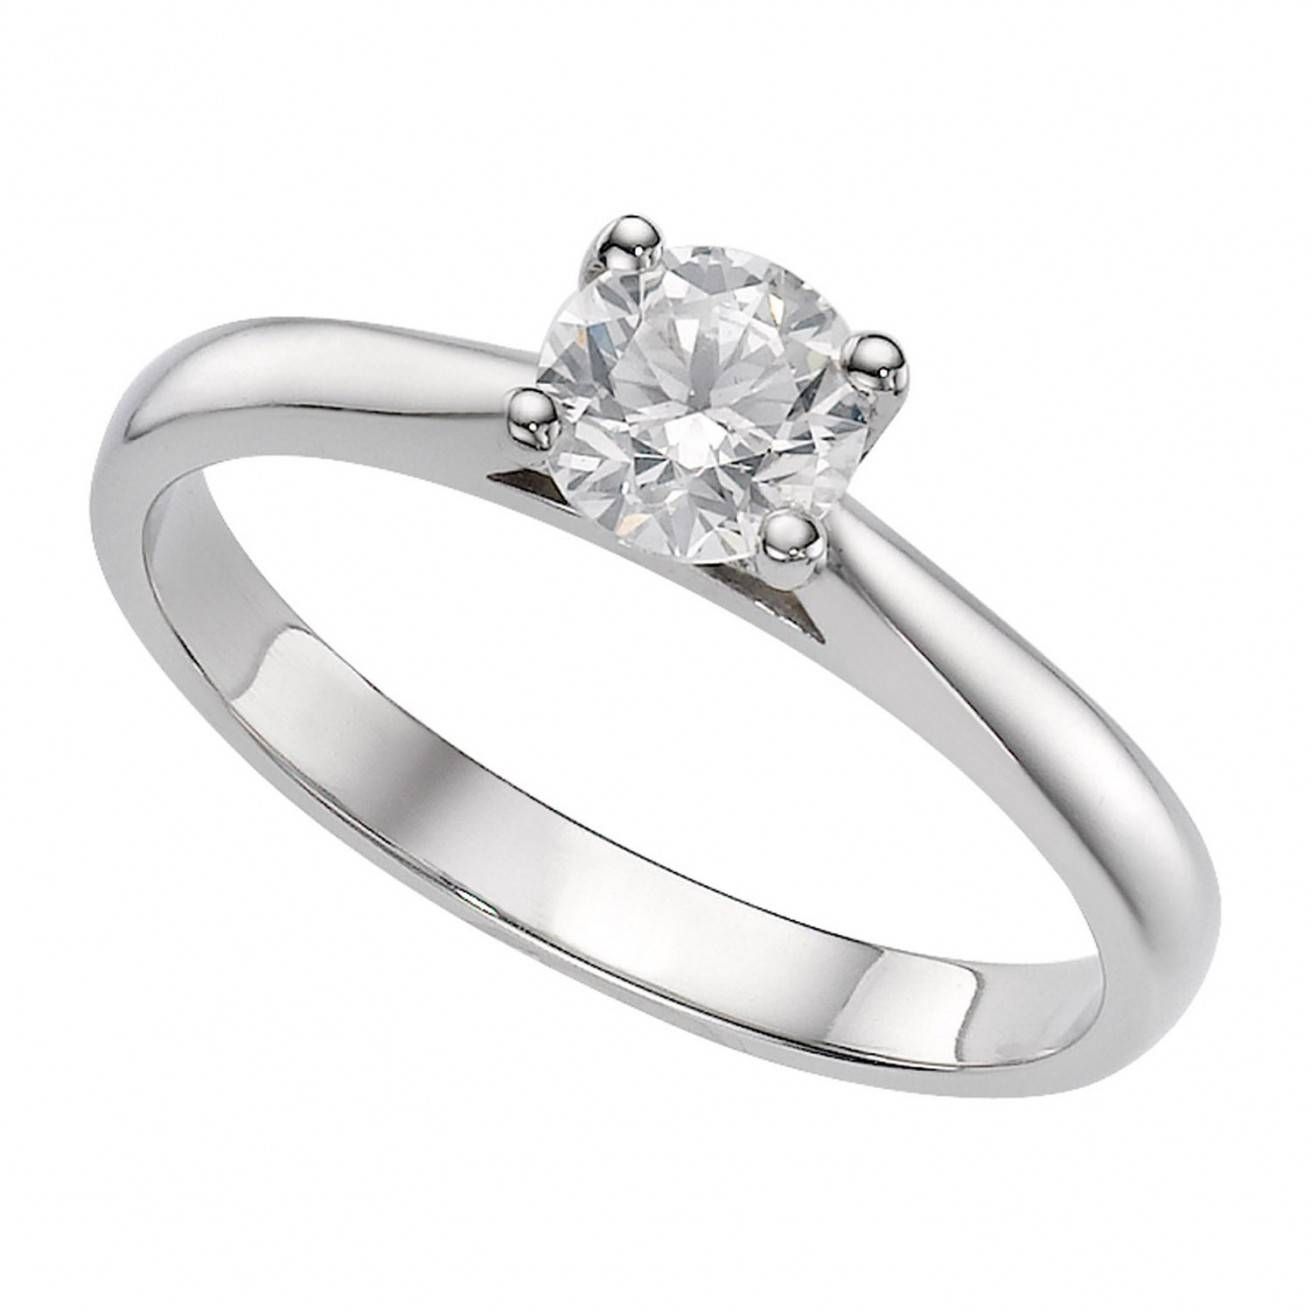 Buy Engagement Rings Online – Platinum, White Gold & More – Fraser Within Wedding Rings With Platinum Diamond (View 9 of 15)